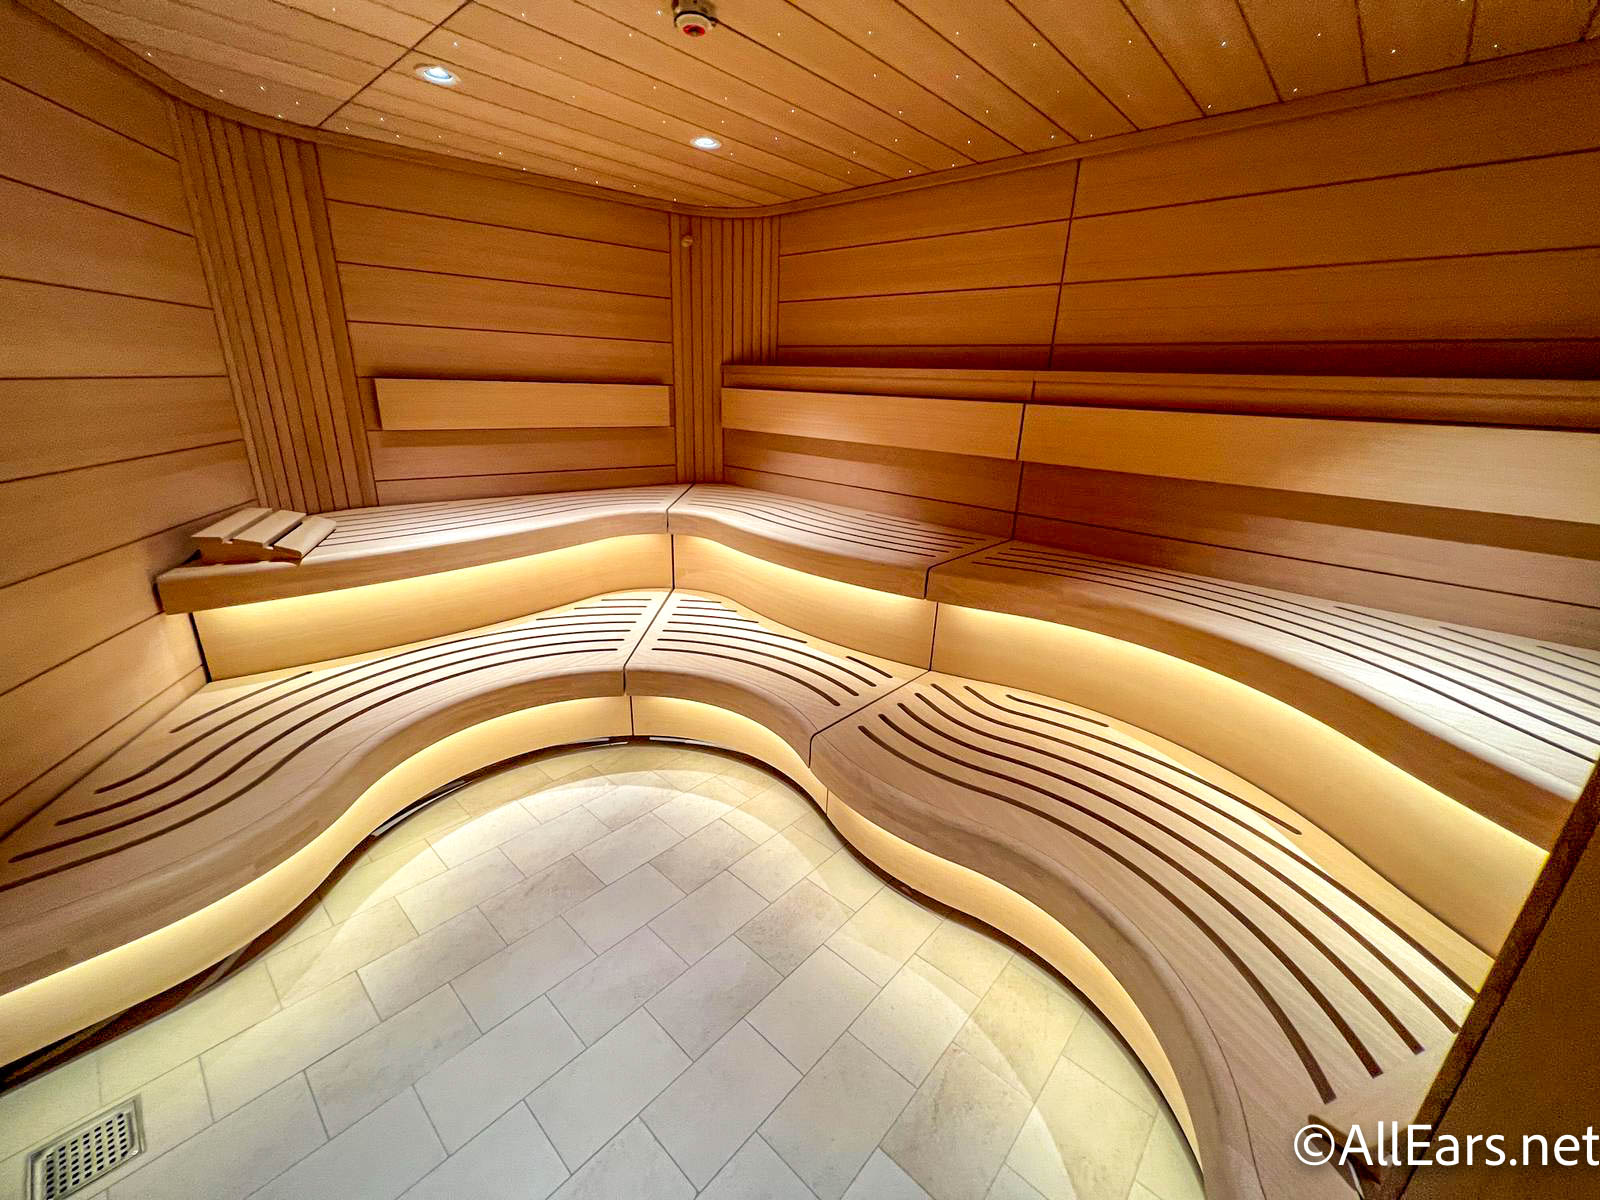 2022-dcl-disney-cruise-line-disney-wish-media-event-preview-senses-spa-changing-room-relaxation-room- hammam-shower-37 - AllEars.Net